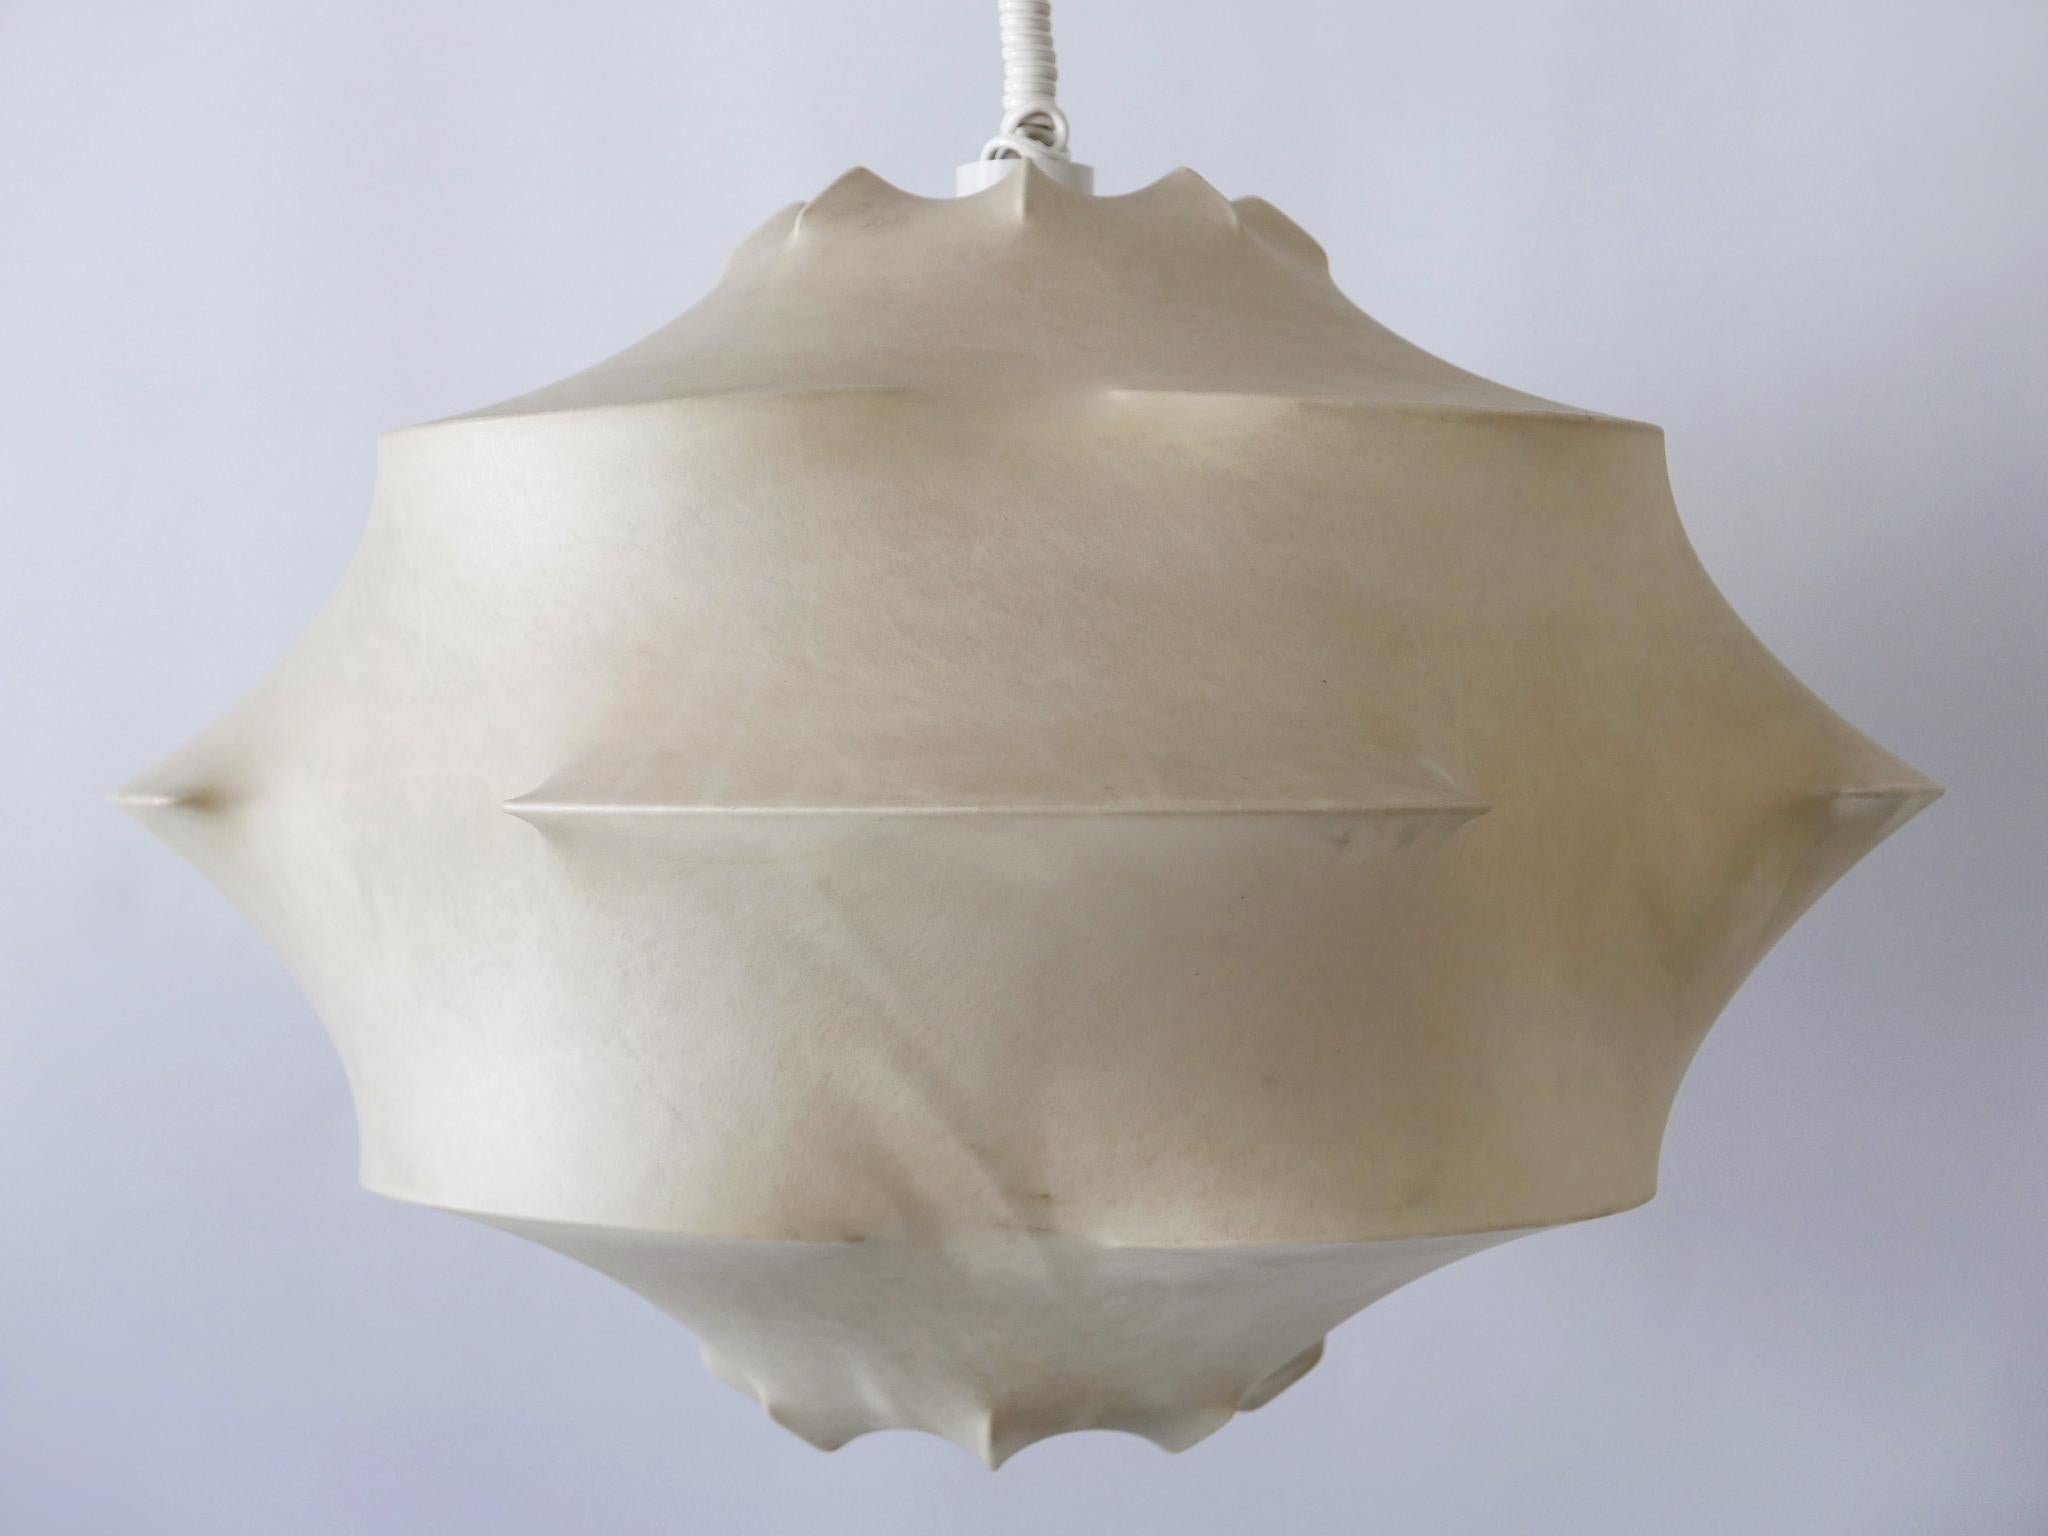 XL Mid-Century Modern Cocoon Pendant Lamp or Hanging Light by Flos Italy, 1960s For Sale 4